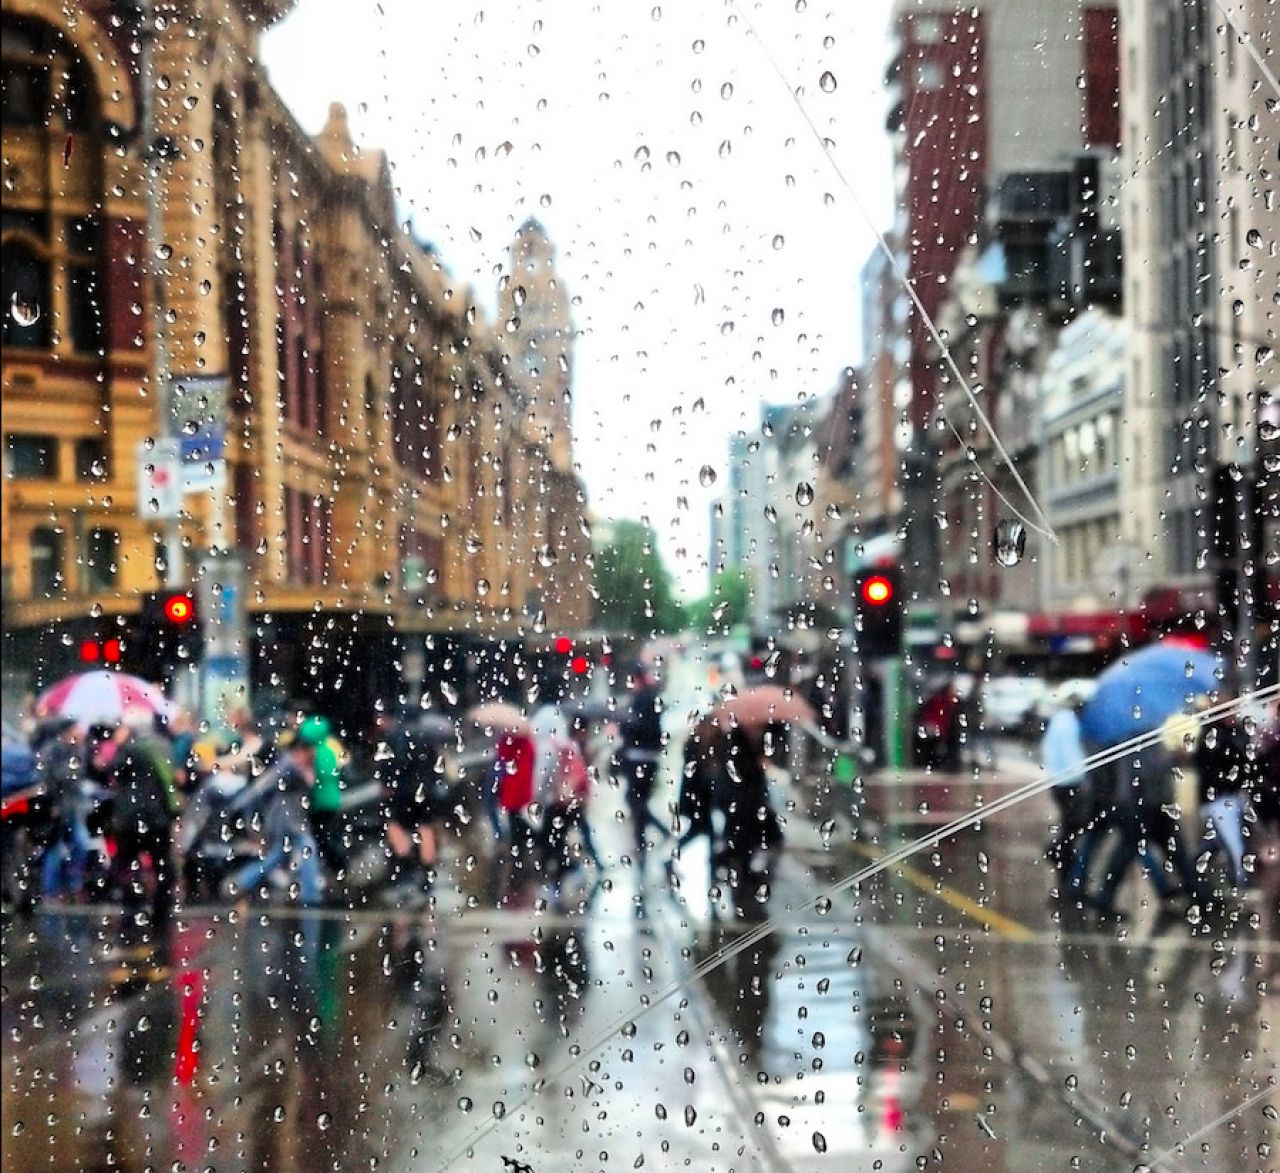 Does Melbourne’s rain occur in ‘lines’? thumbnail image